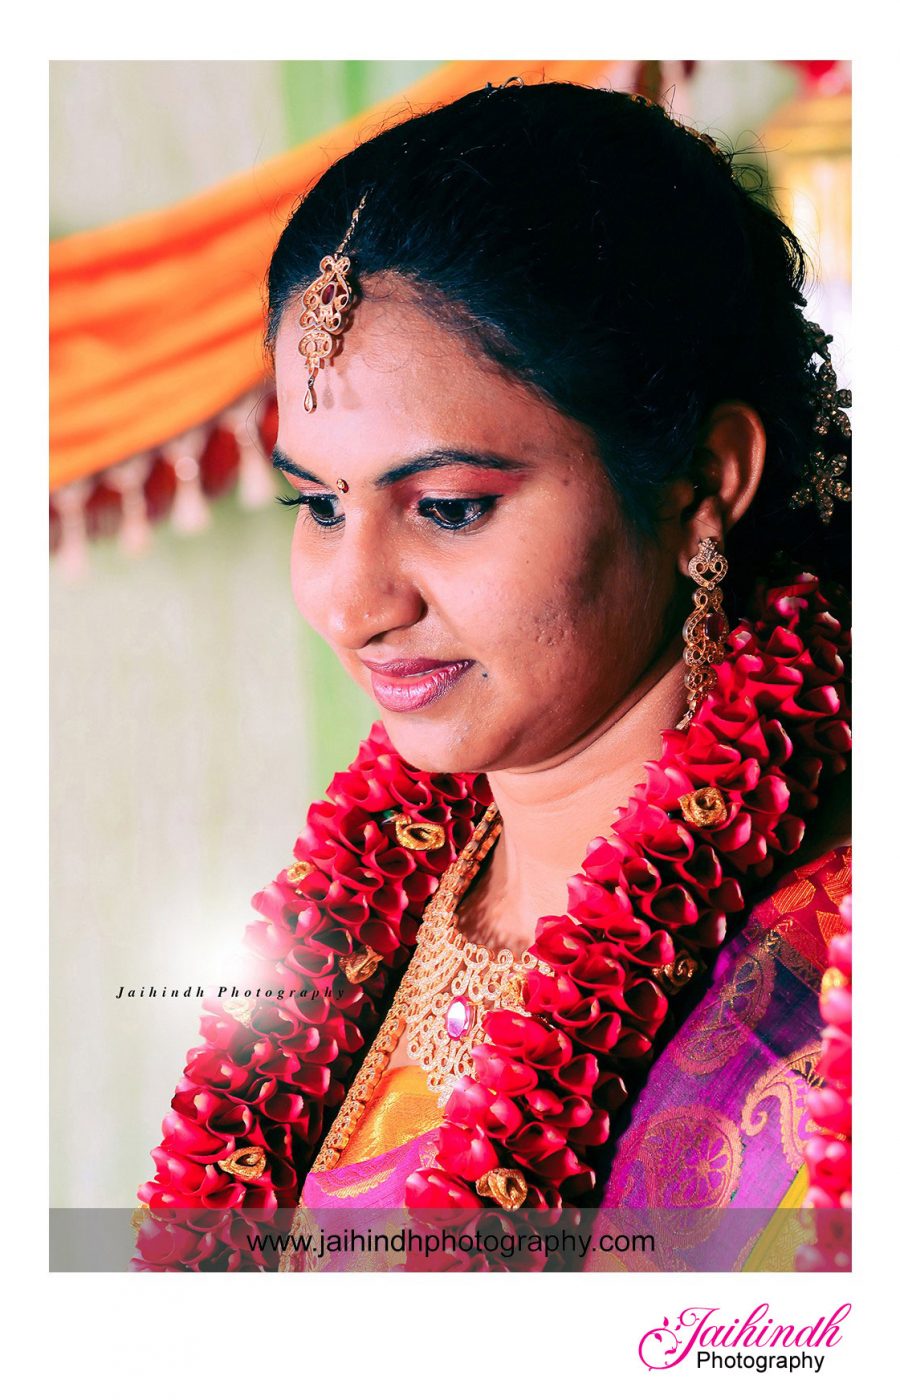 Candid photography in Erode, Wedding Photography in Erode, Best Photographers in Erode, Candid wedding photographers in Erode, Marriage photography in Erode, Candid Photography in Erode, Best Candid Photographers in Erode. Videographers in Erode, Wedding Videographers in Erode.